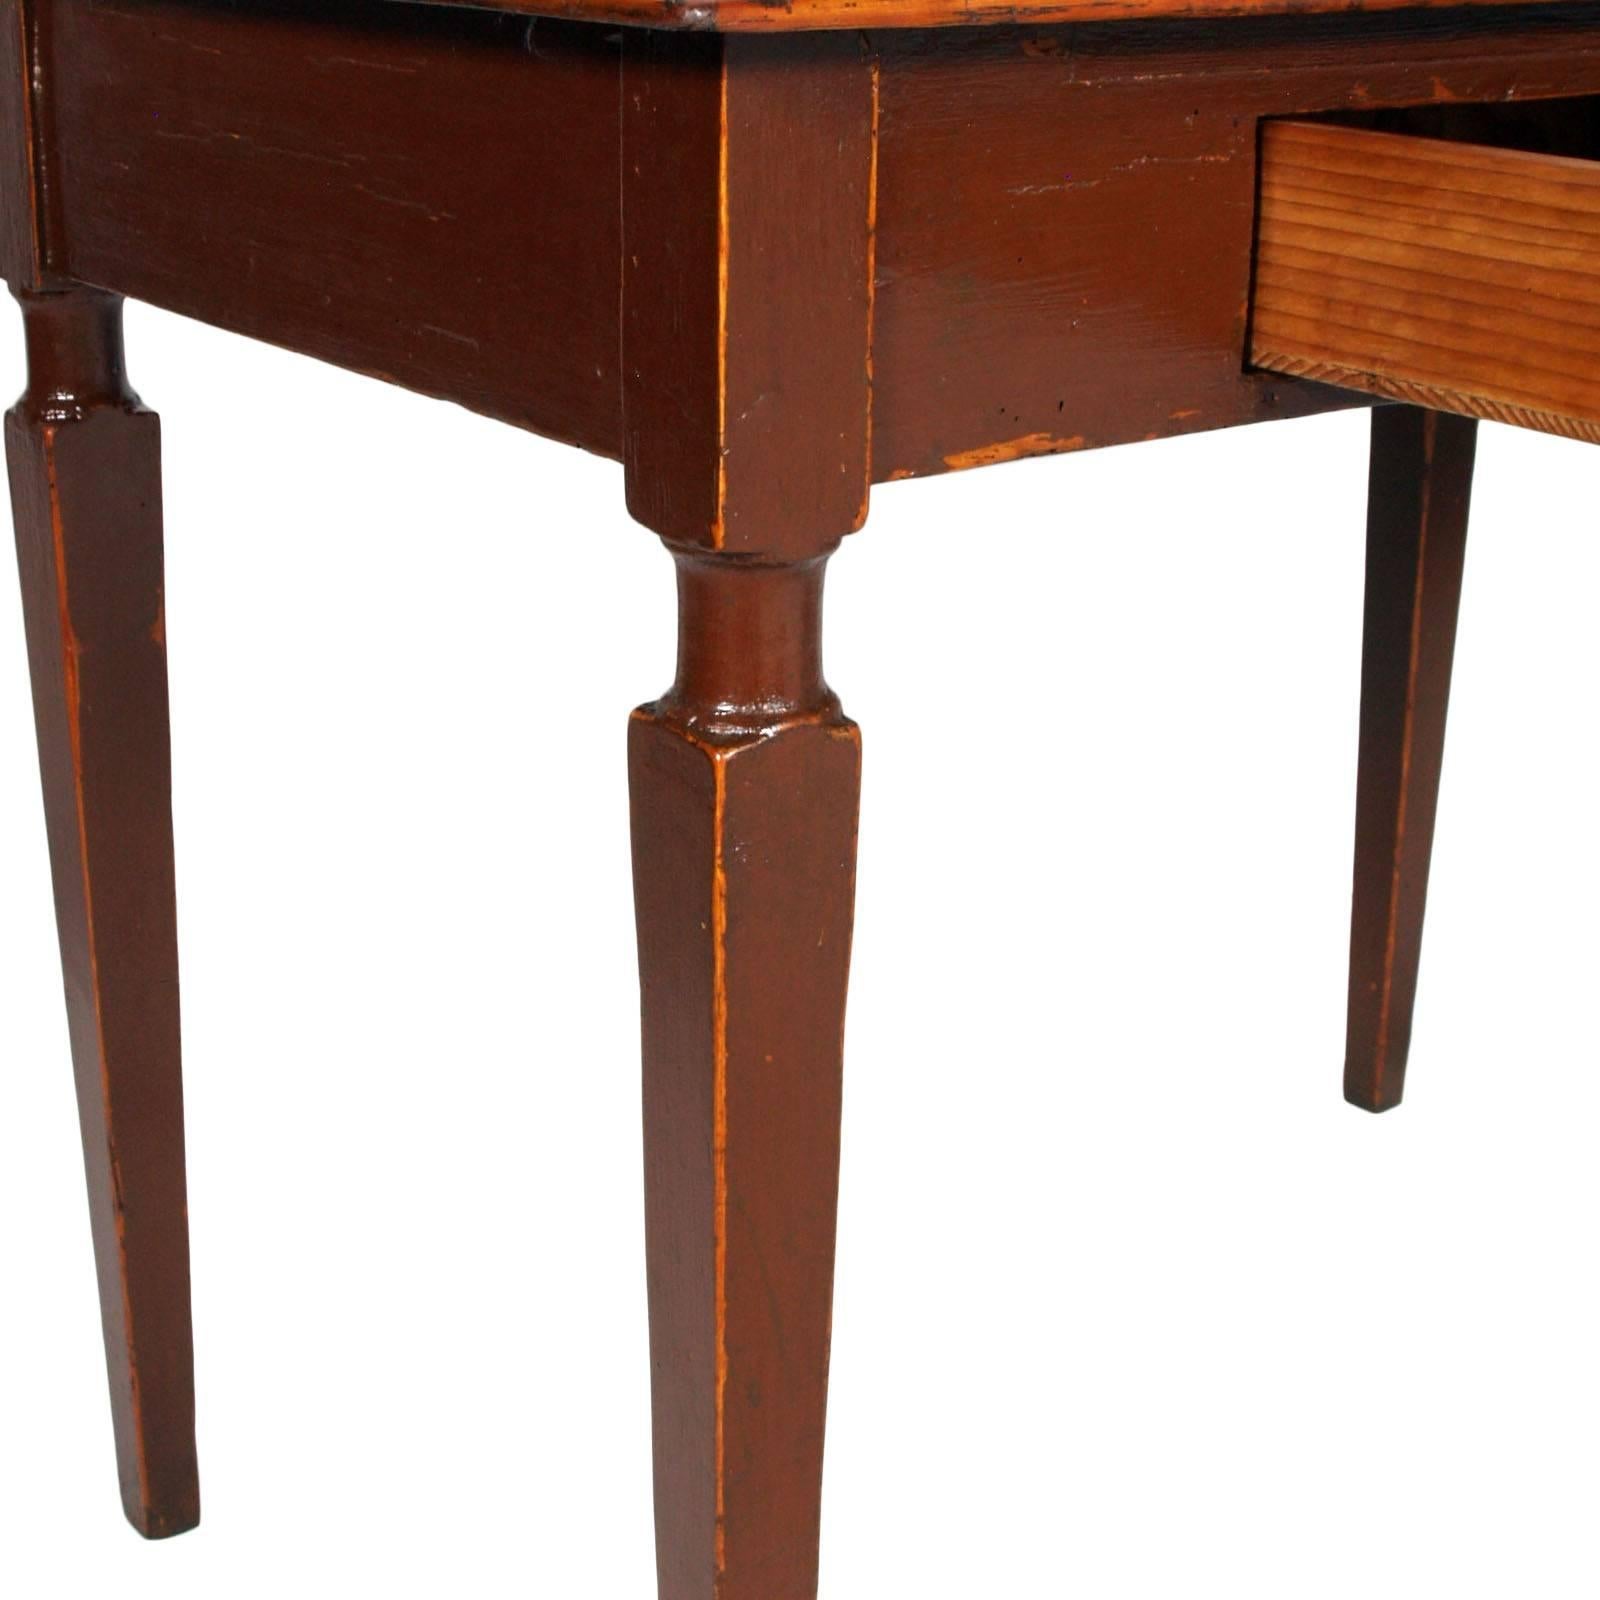 Painted 18th Century Rustic Desk Table, Country Table, Original Pinewood Laquered Waxed For Sale